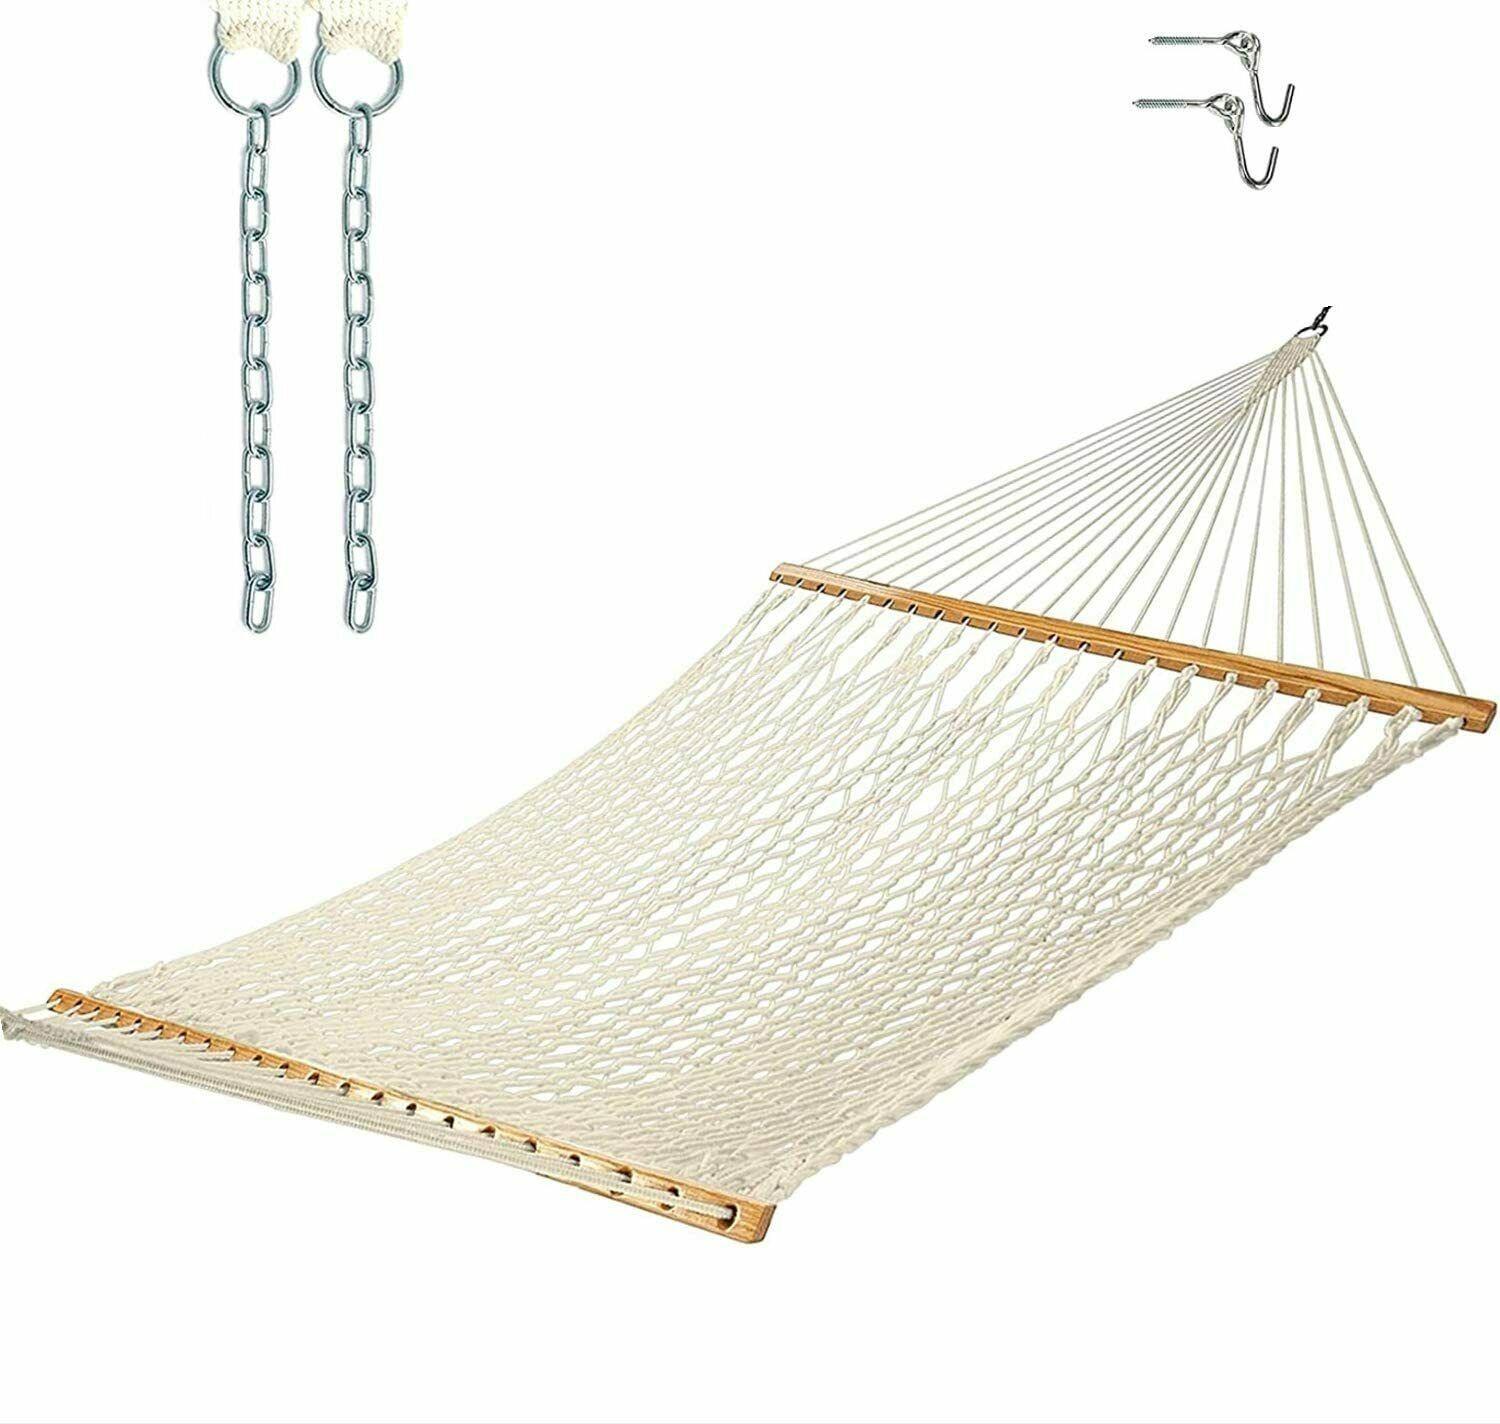 Castaway Living 13 Ft. Traditional Cotton Rope Hammock With Hanging Hardware